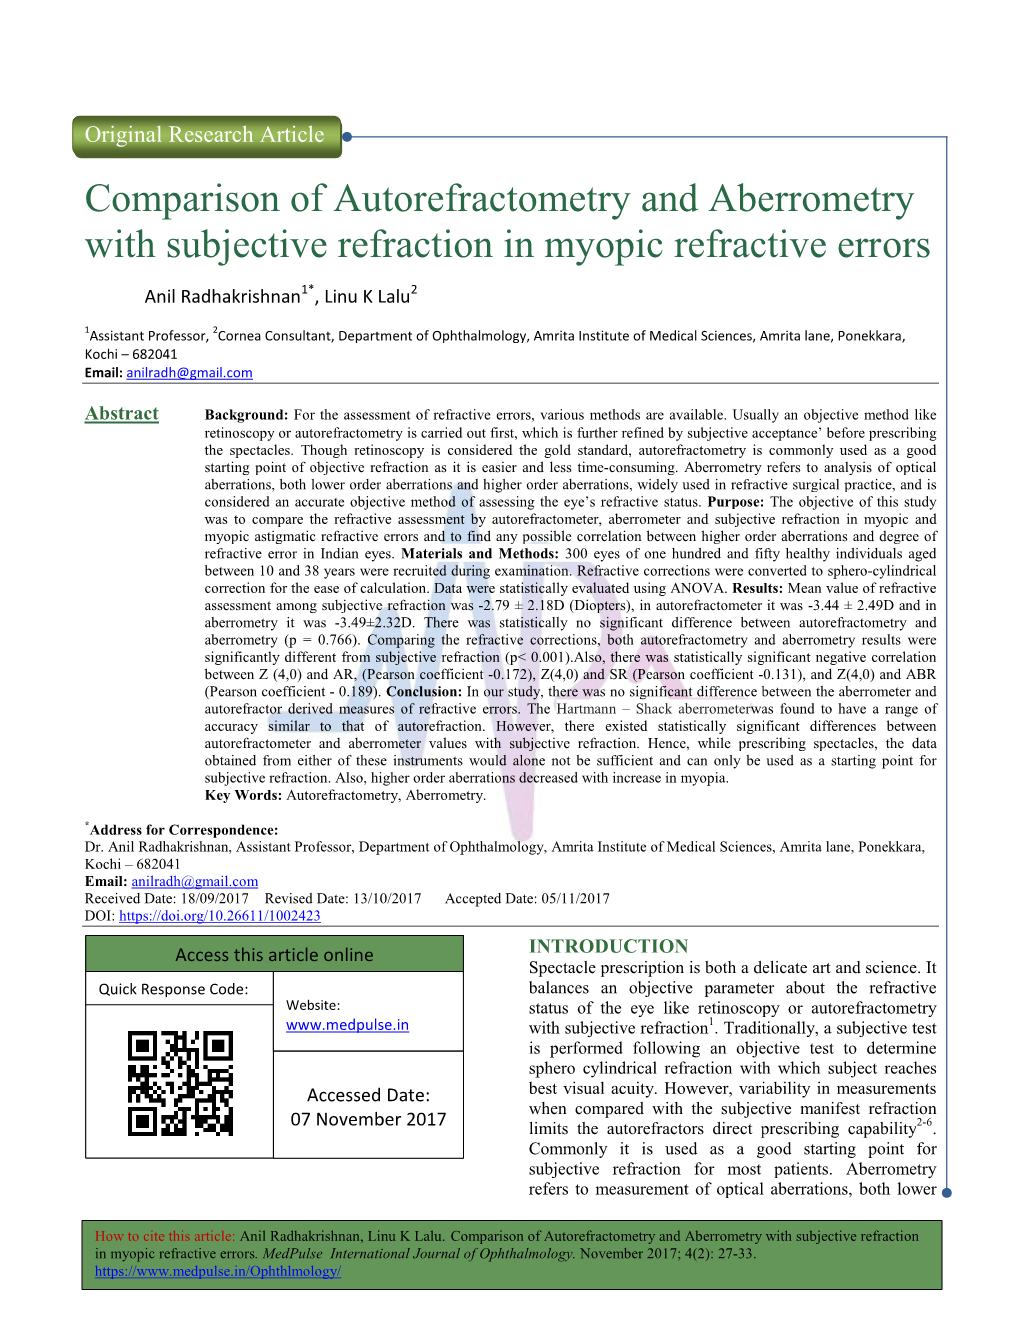 Comparison of Autorefractome with Subjective Refraction in My Arison of Autorefractometry and Aberrometry Ubjective Refraction I